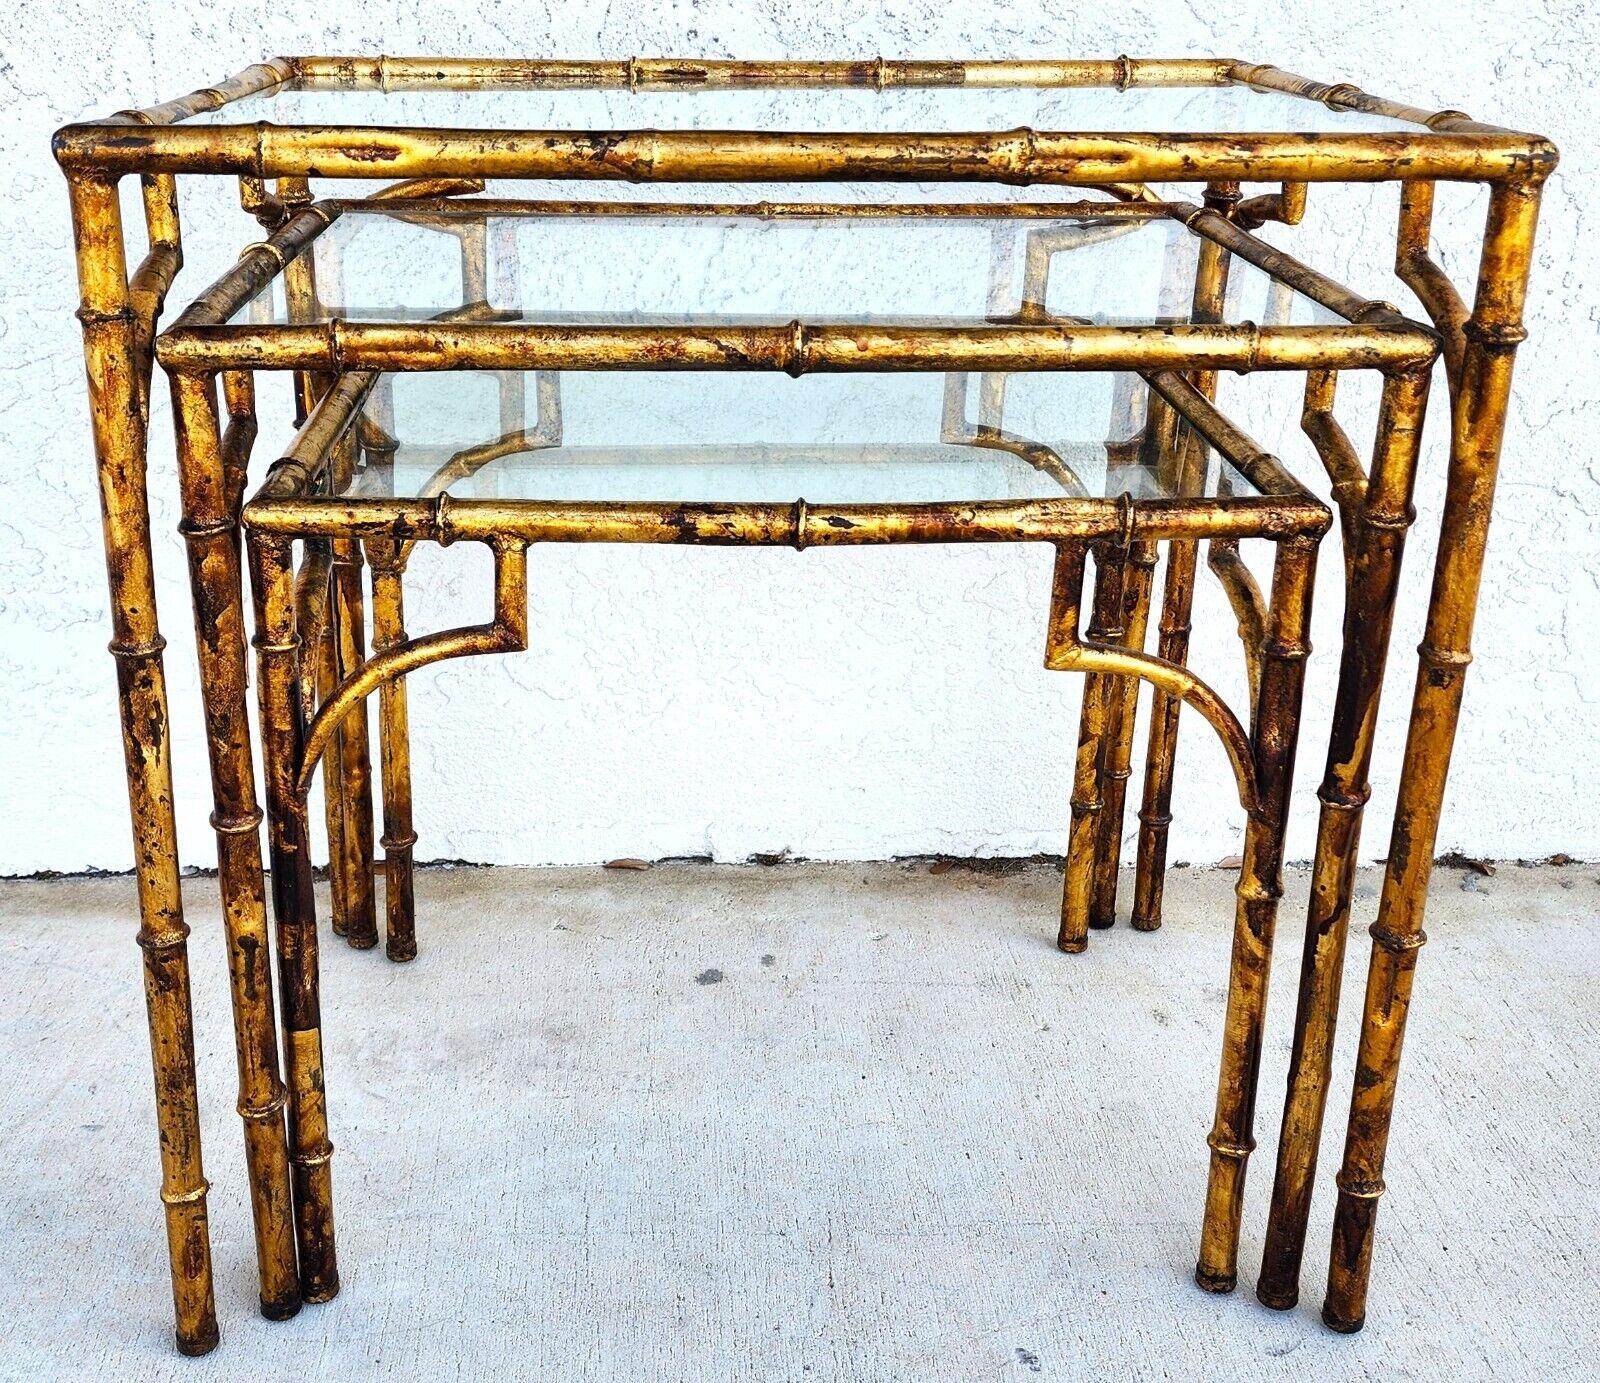 For FULL item description click on CONTINUE READING at the bottom of this page.

Offering one of our recent Palm Beach estate fine furniture acquisitions of a
set of 3 vintage 1960s gilded faux bamboo metal nesting tables
Approximate measurements